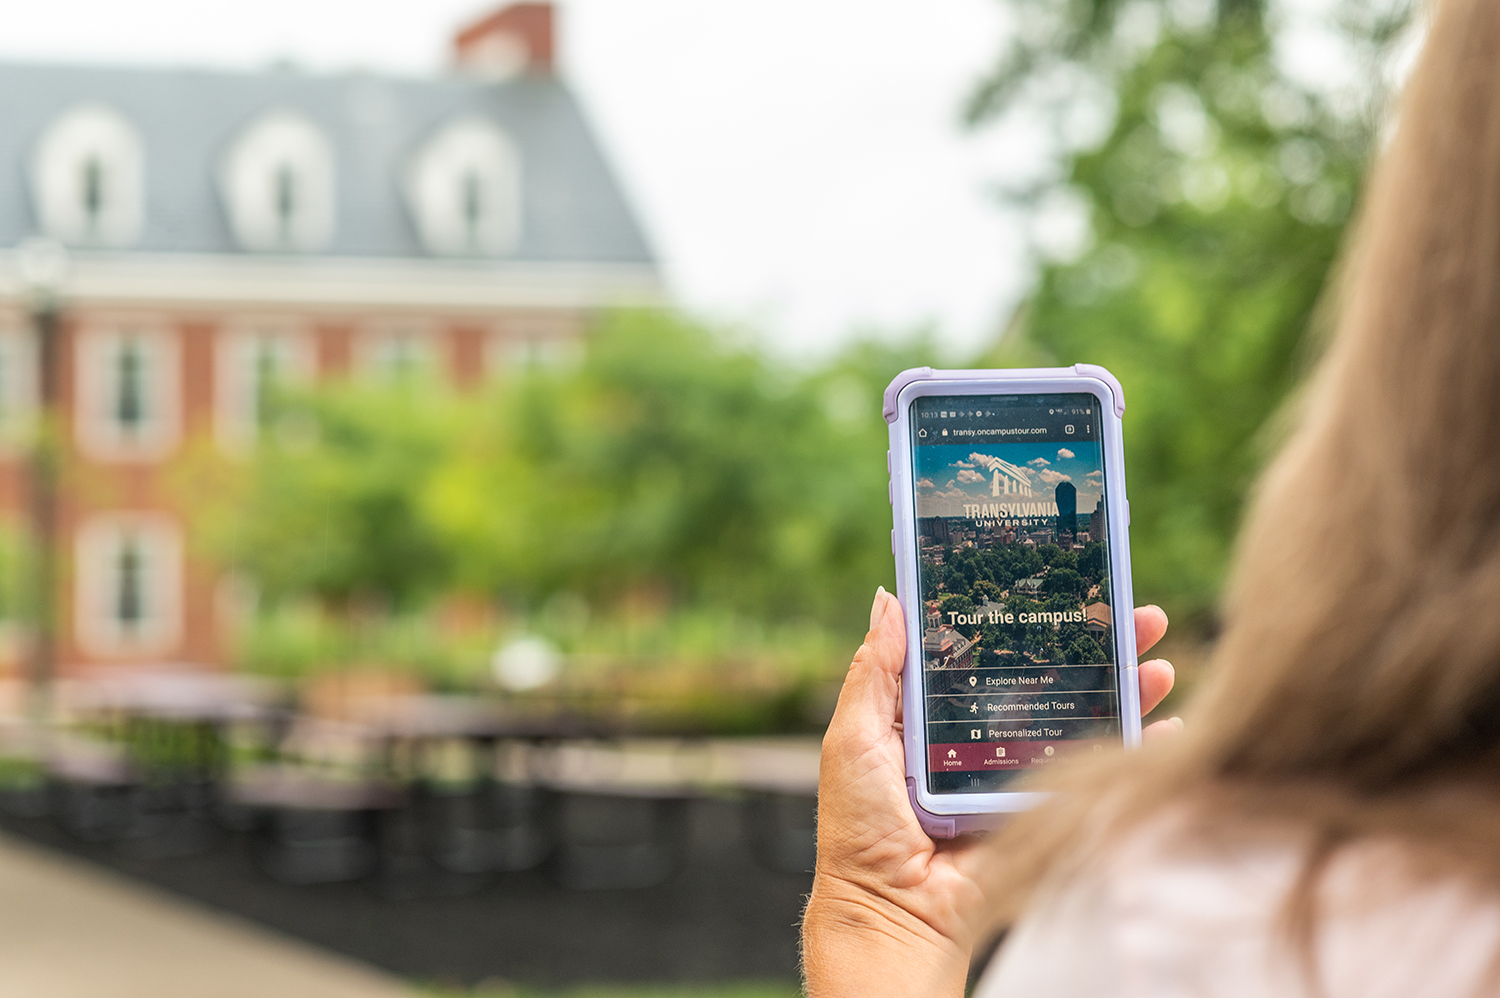 Transylvania launches self-guided, multimedia tours of campus